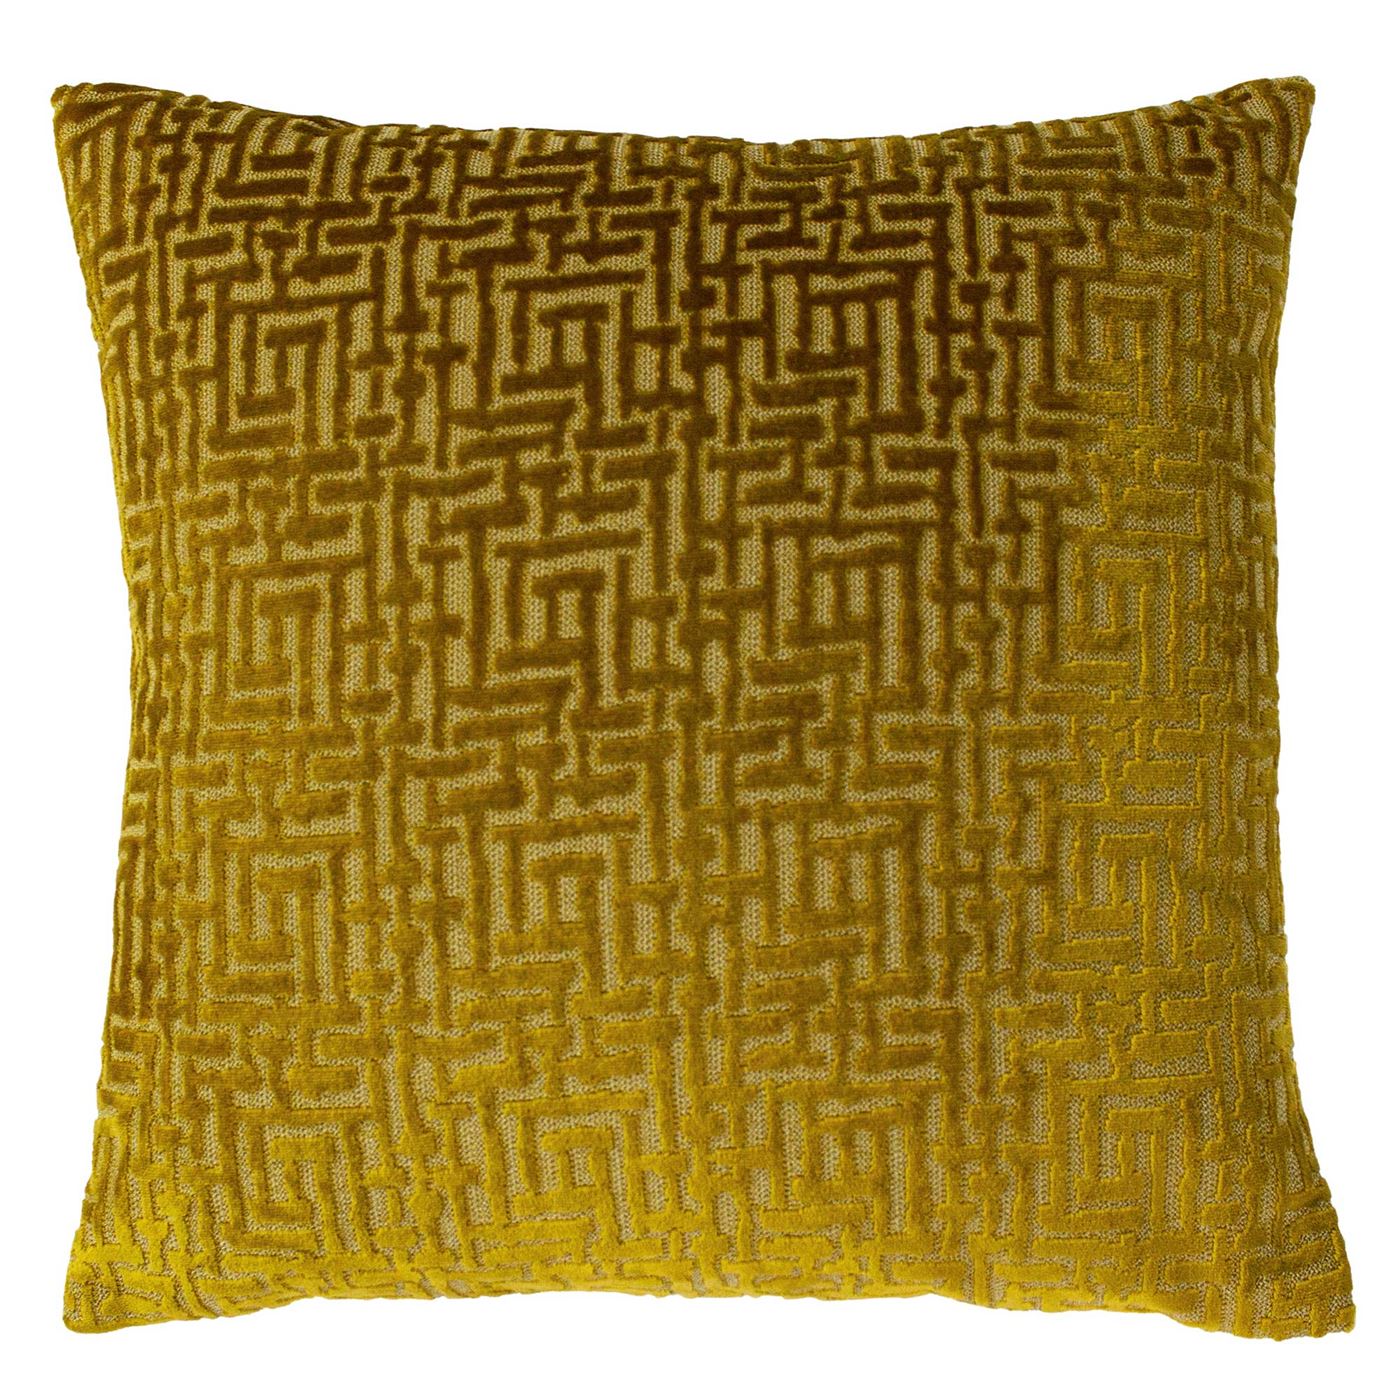 Deco Gold Cushion, Square, Yellow | Barker & Stonehouse